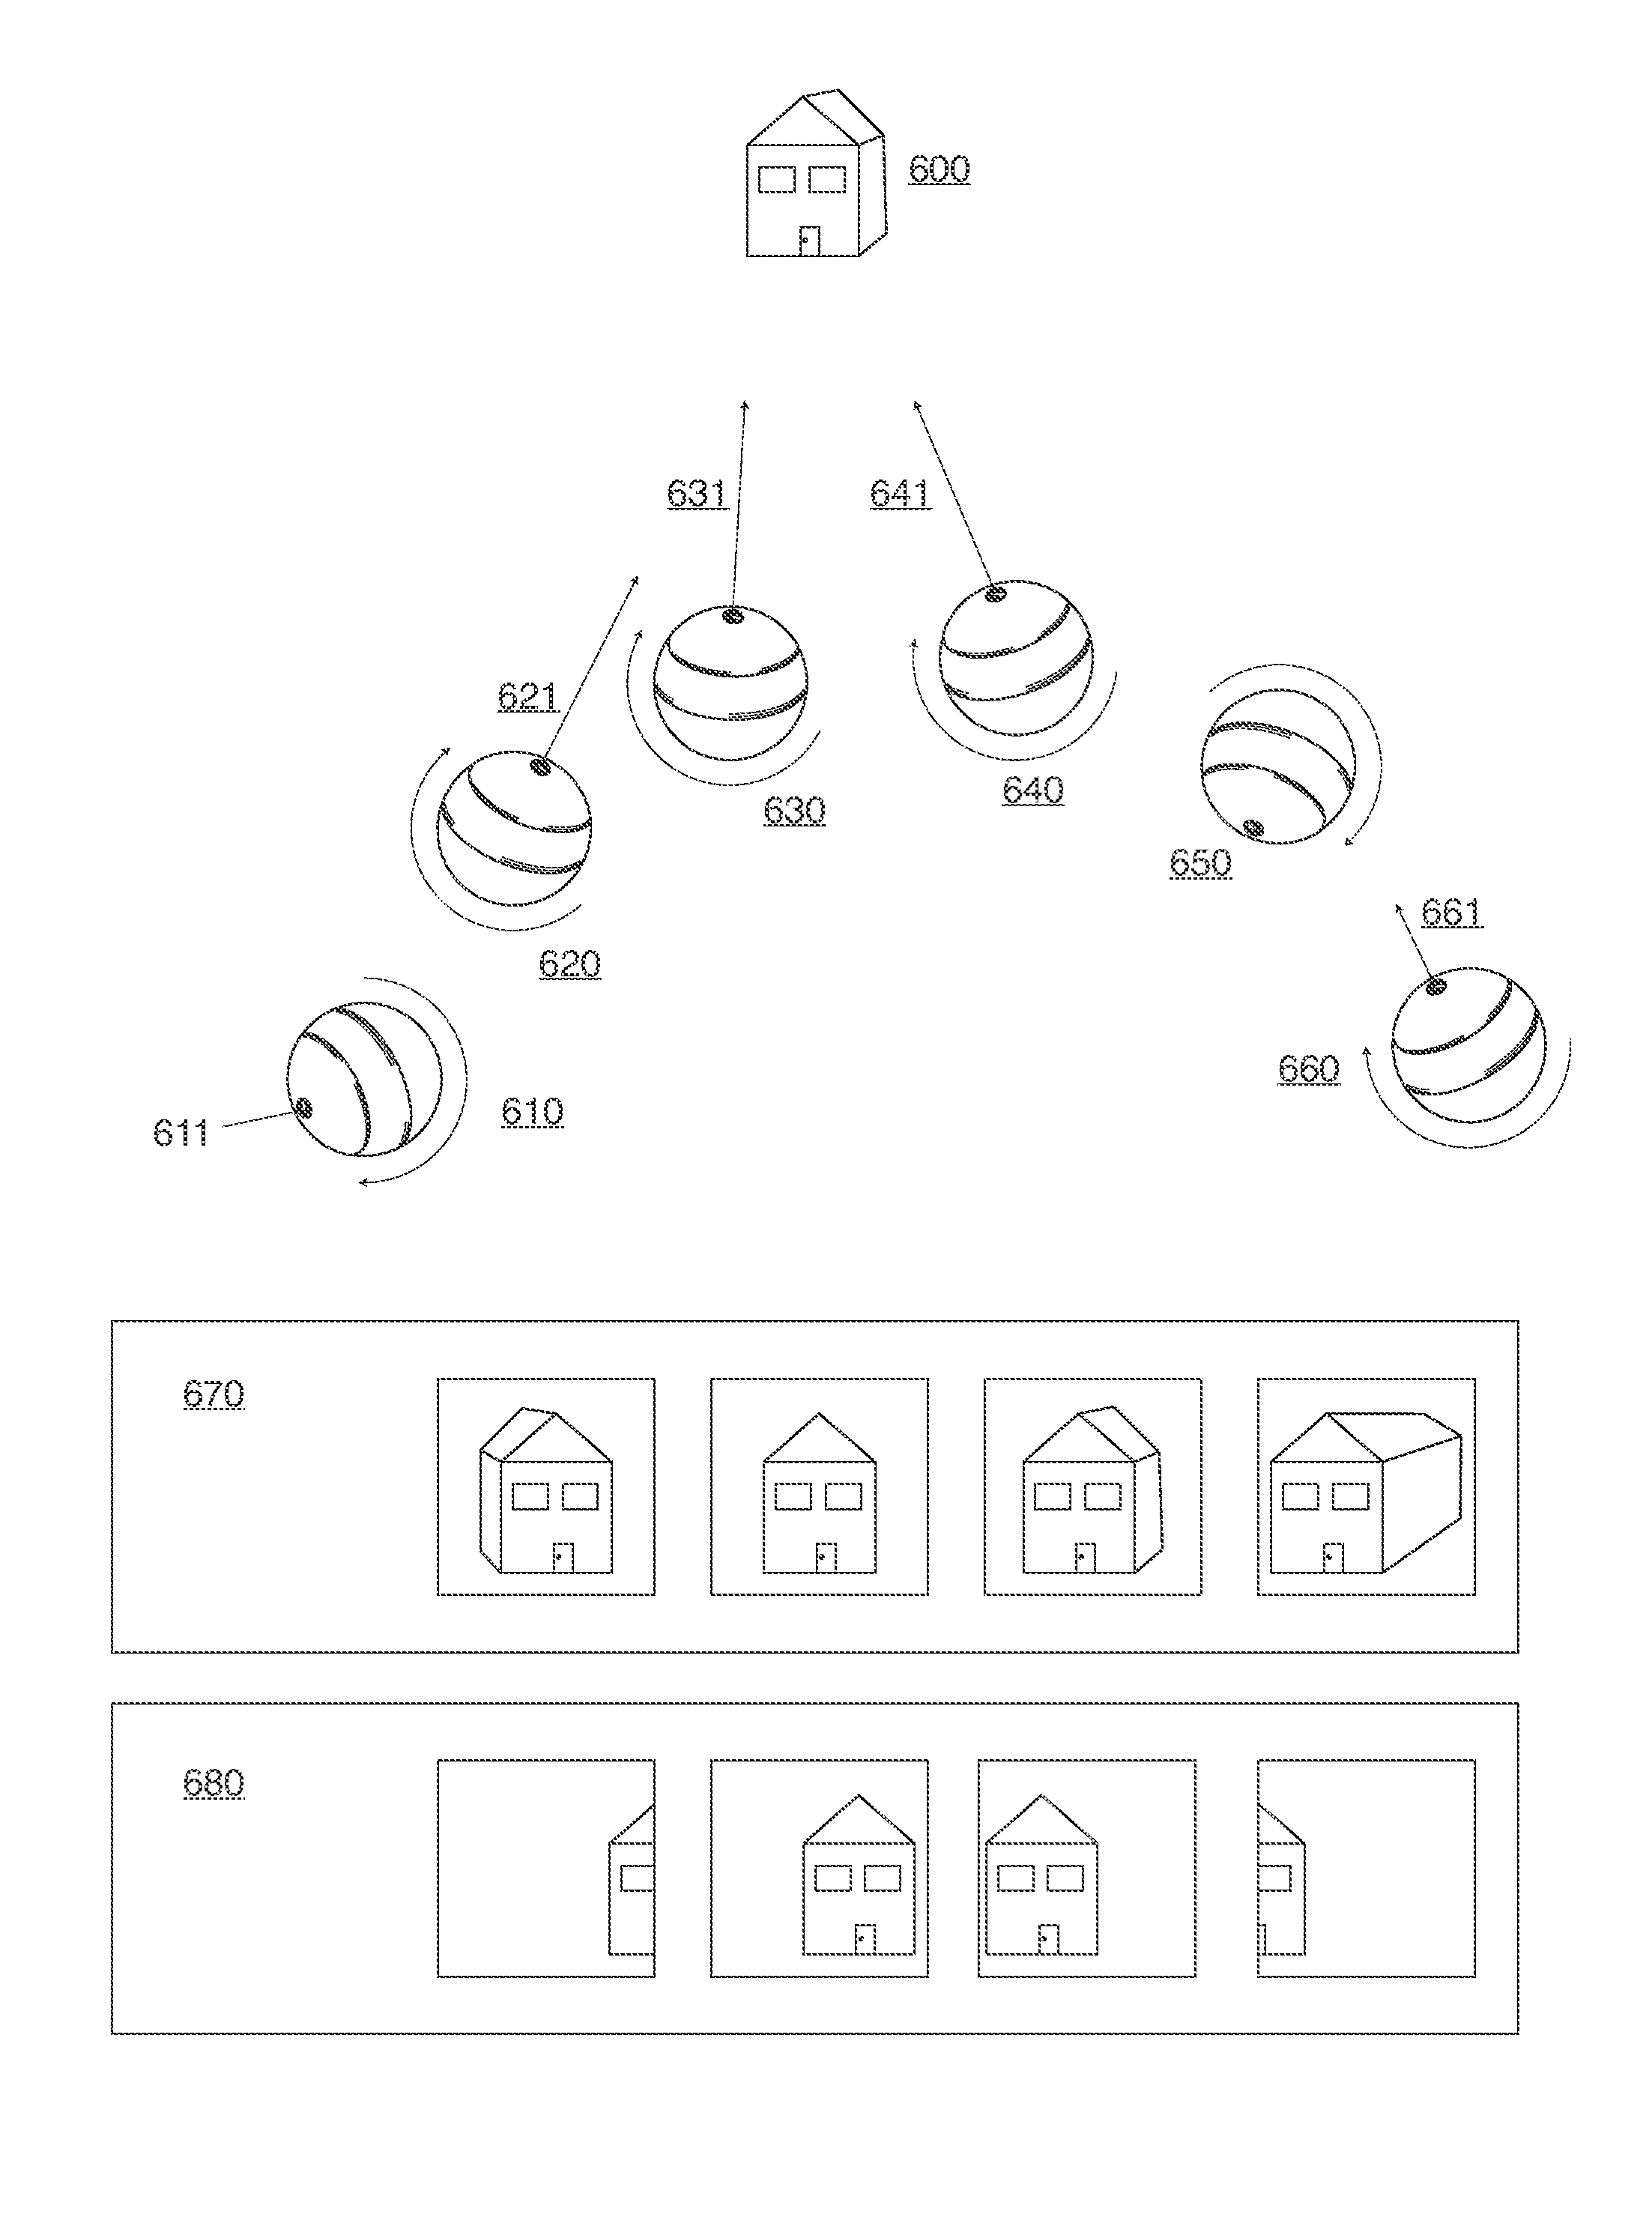 Ball with camera and trajectory control for reconnaissance or recreation